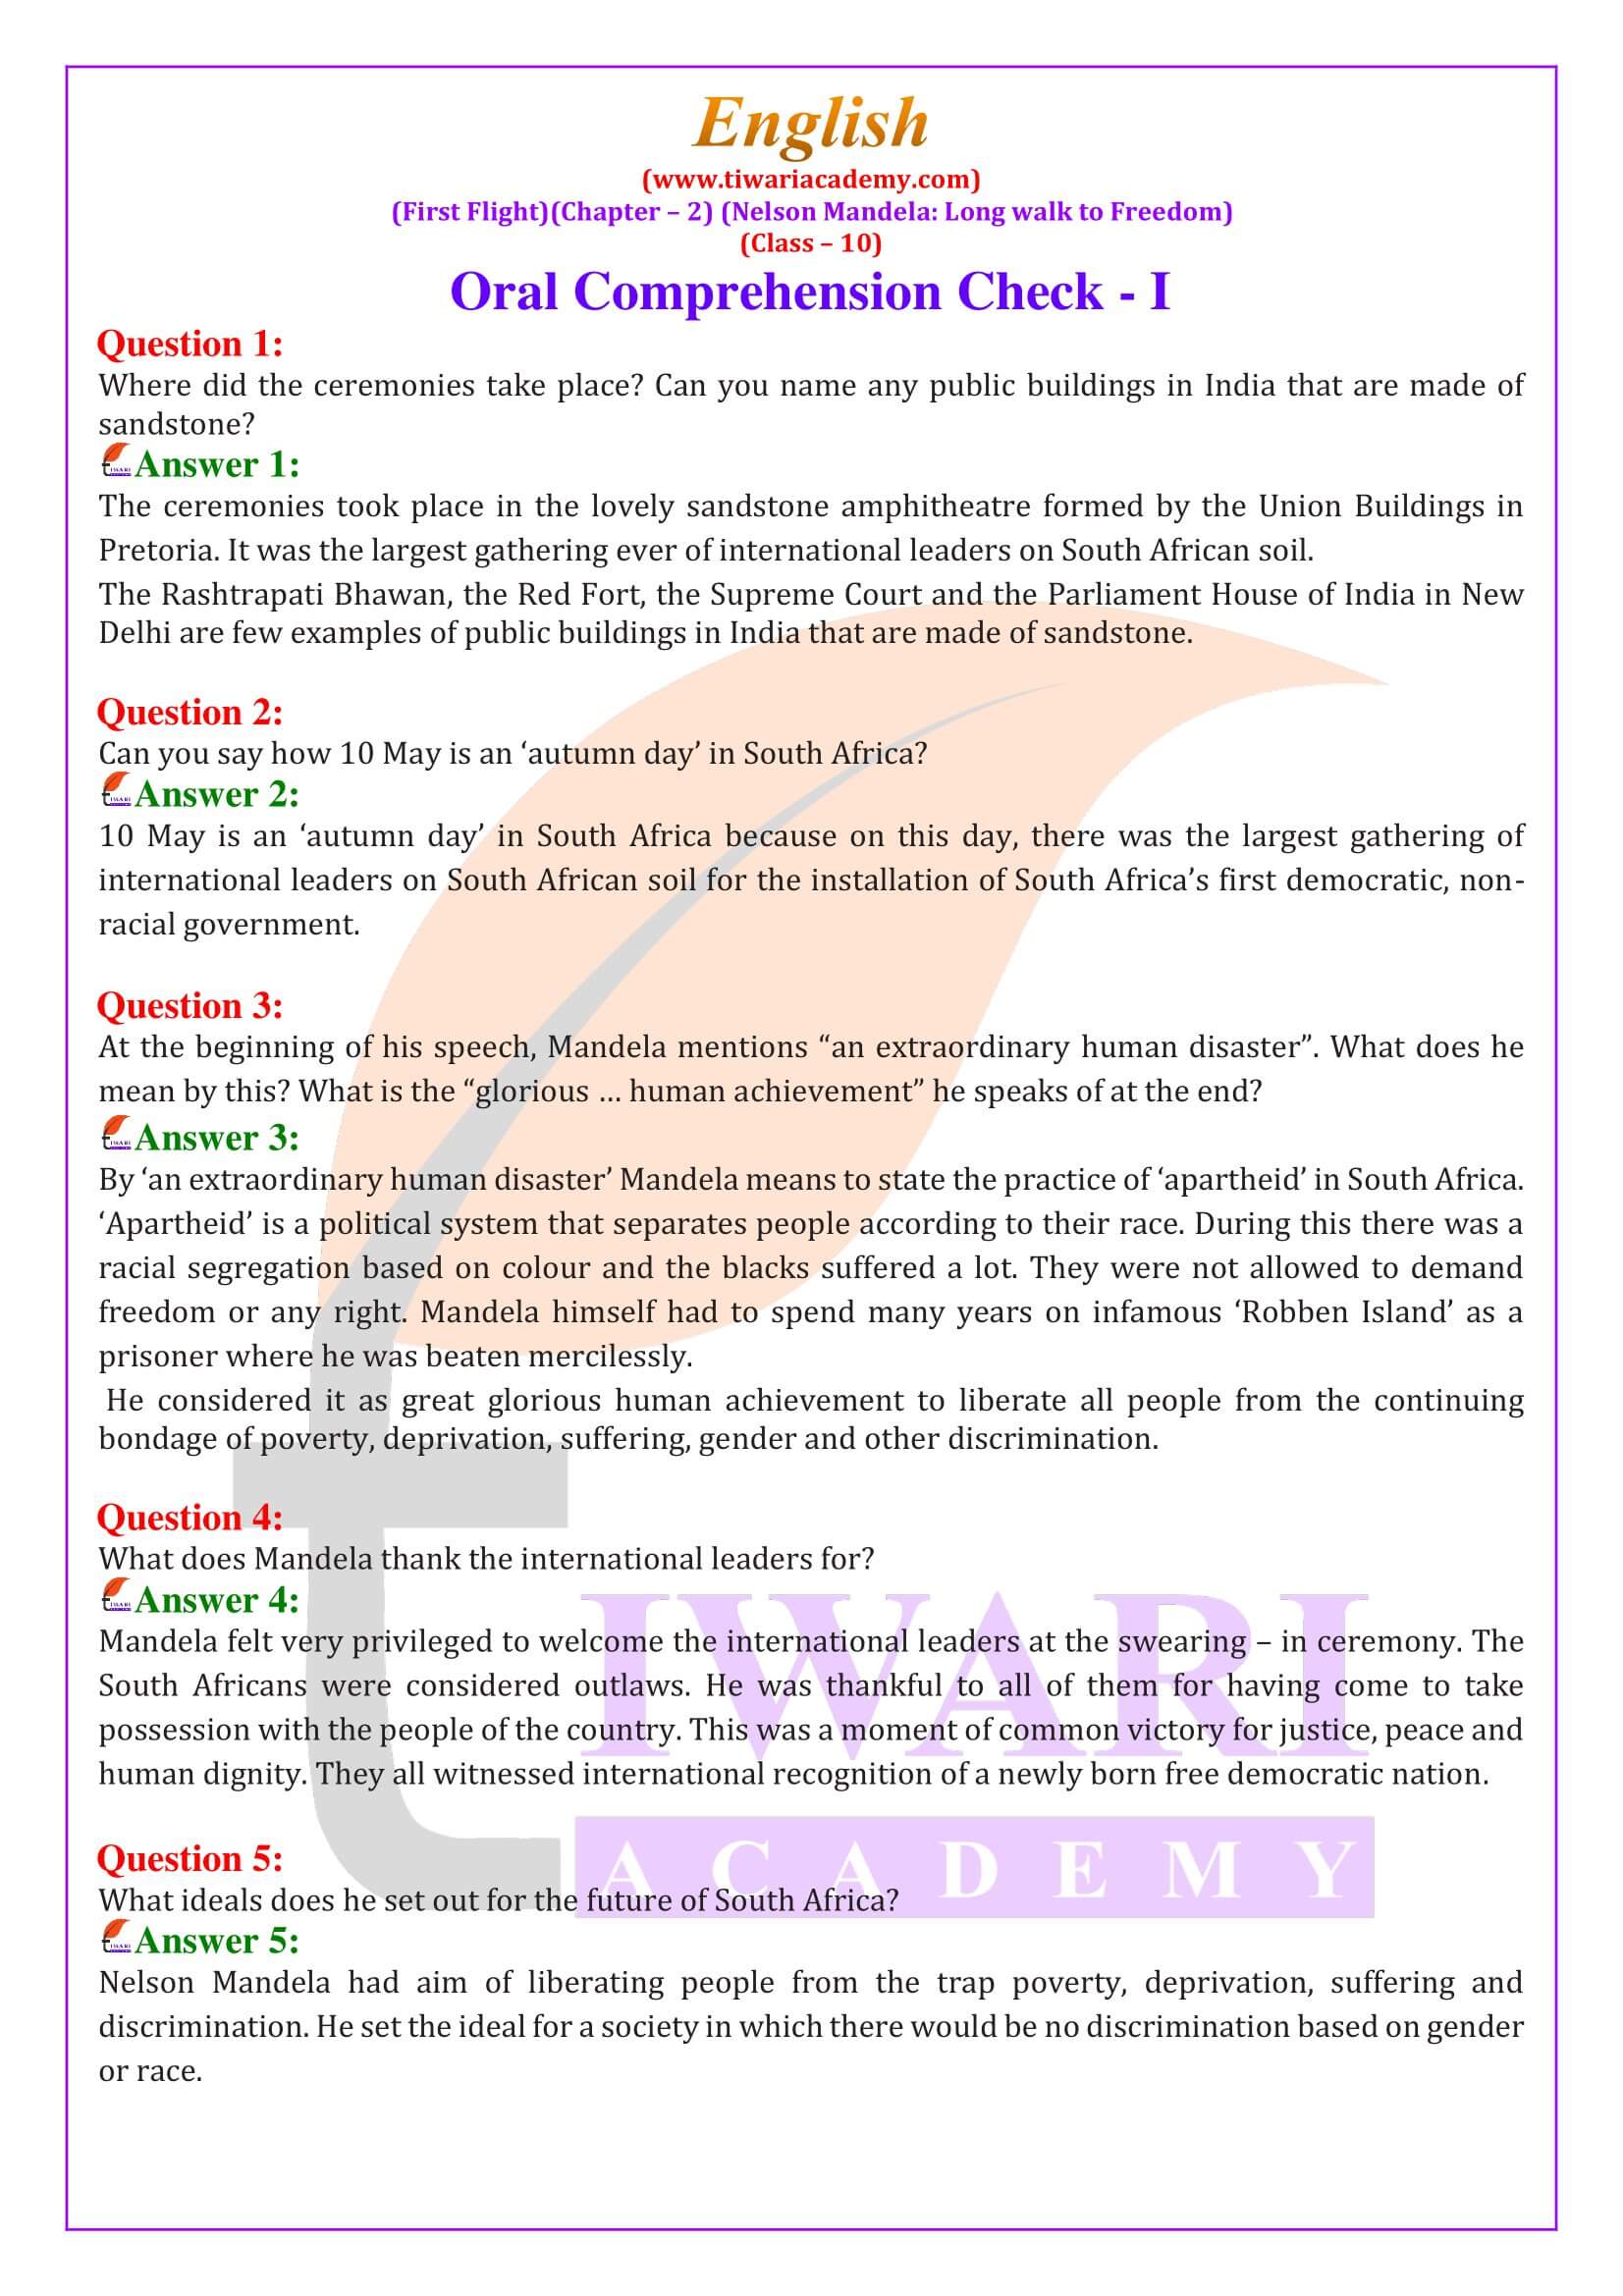 NCERT Solutions for Class 10 English First Flight Chapter 2 Nelson Mandela Long Walk to Freedom